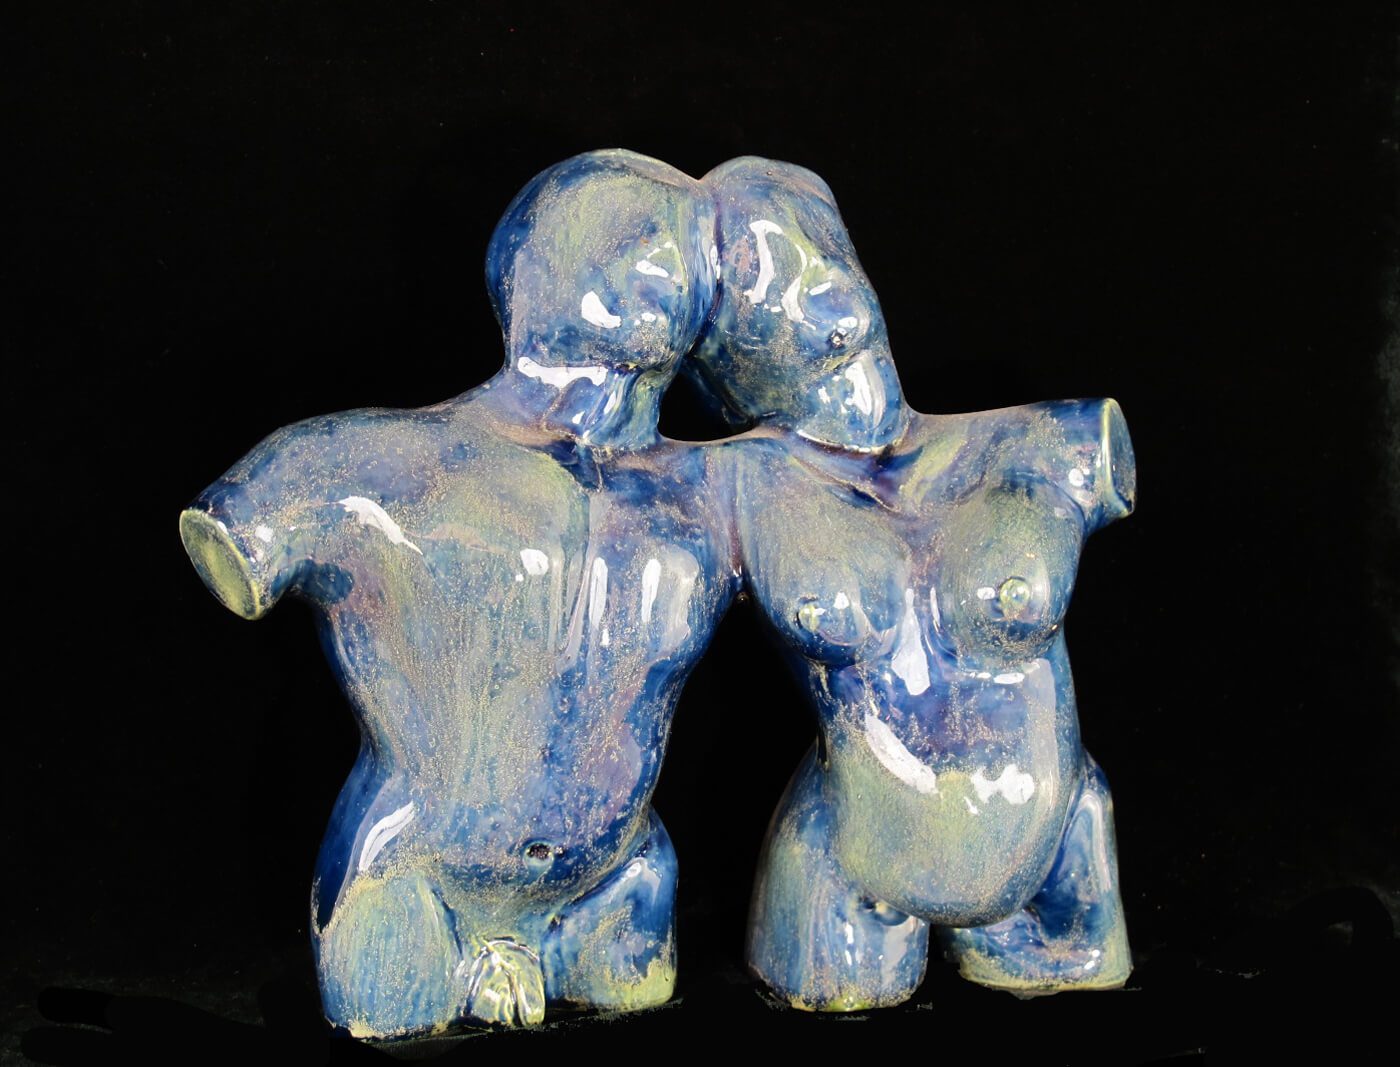 Two blue ceramic figures are hugging each other.